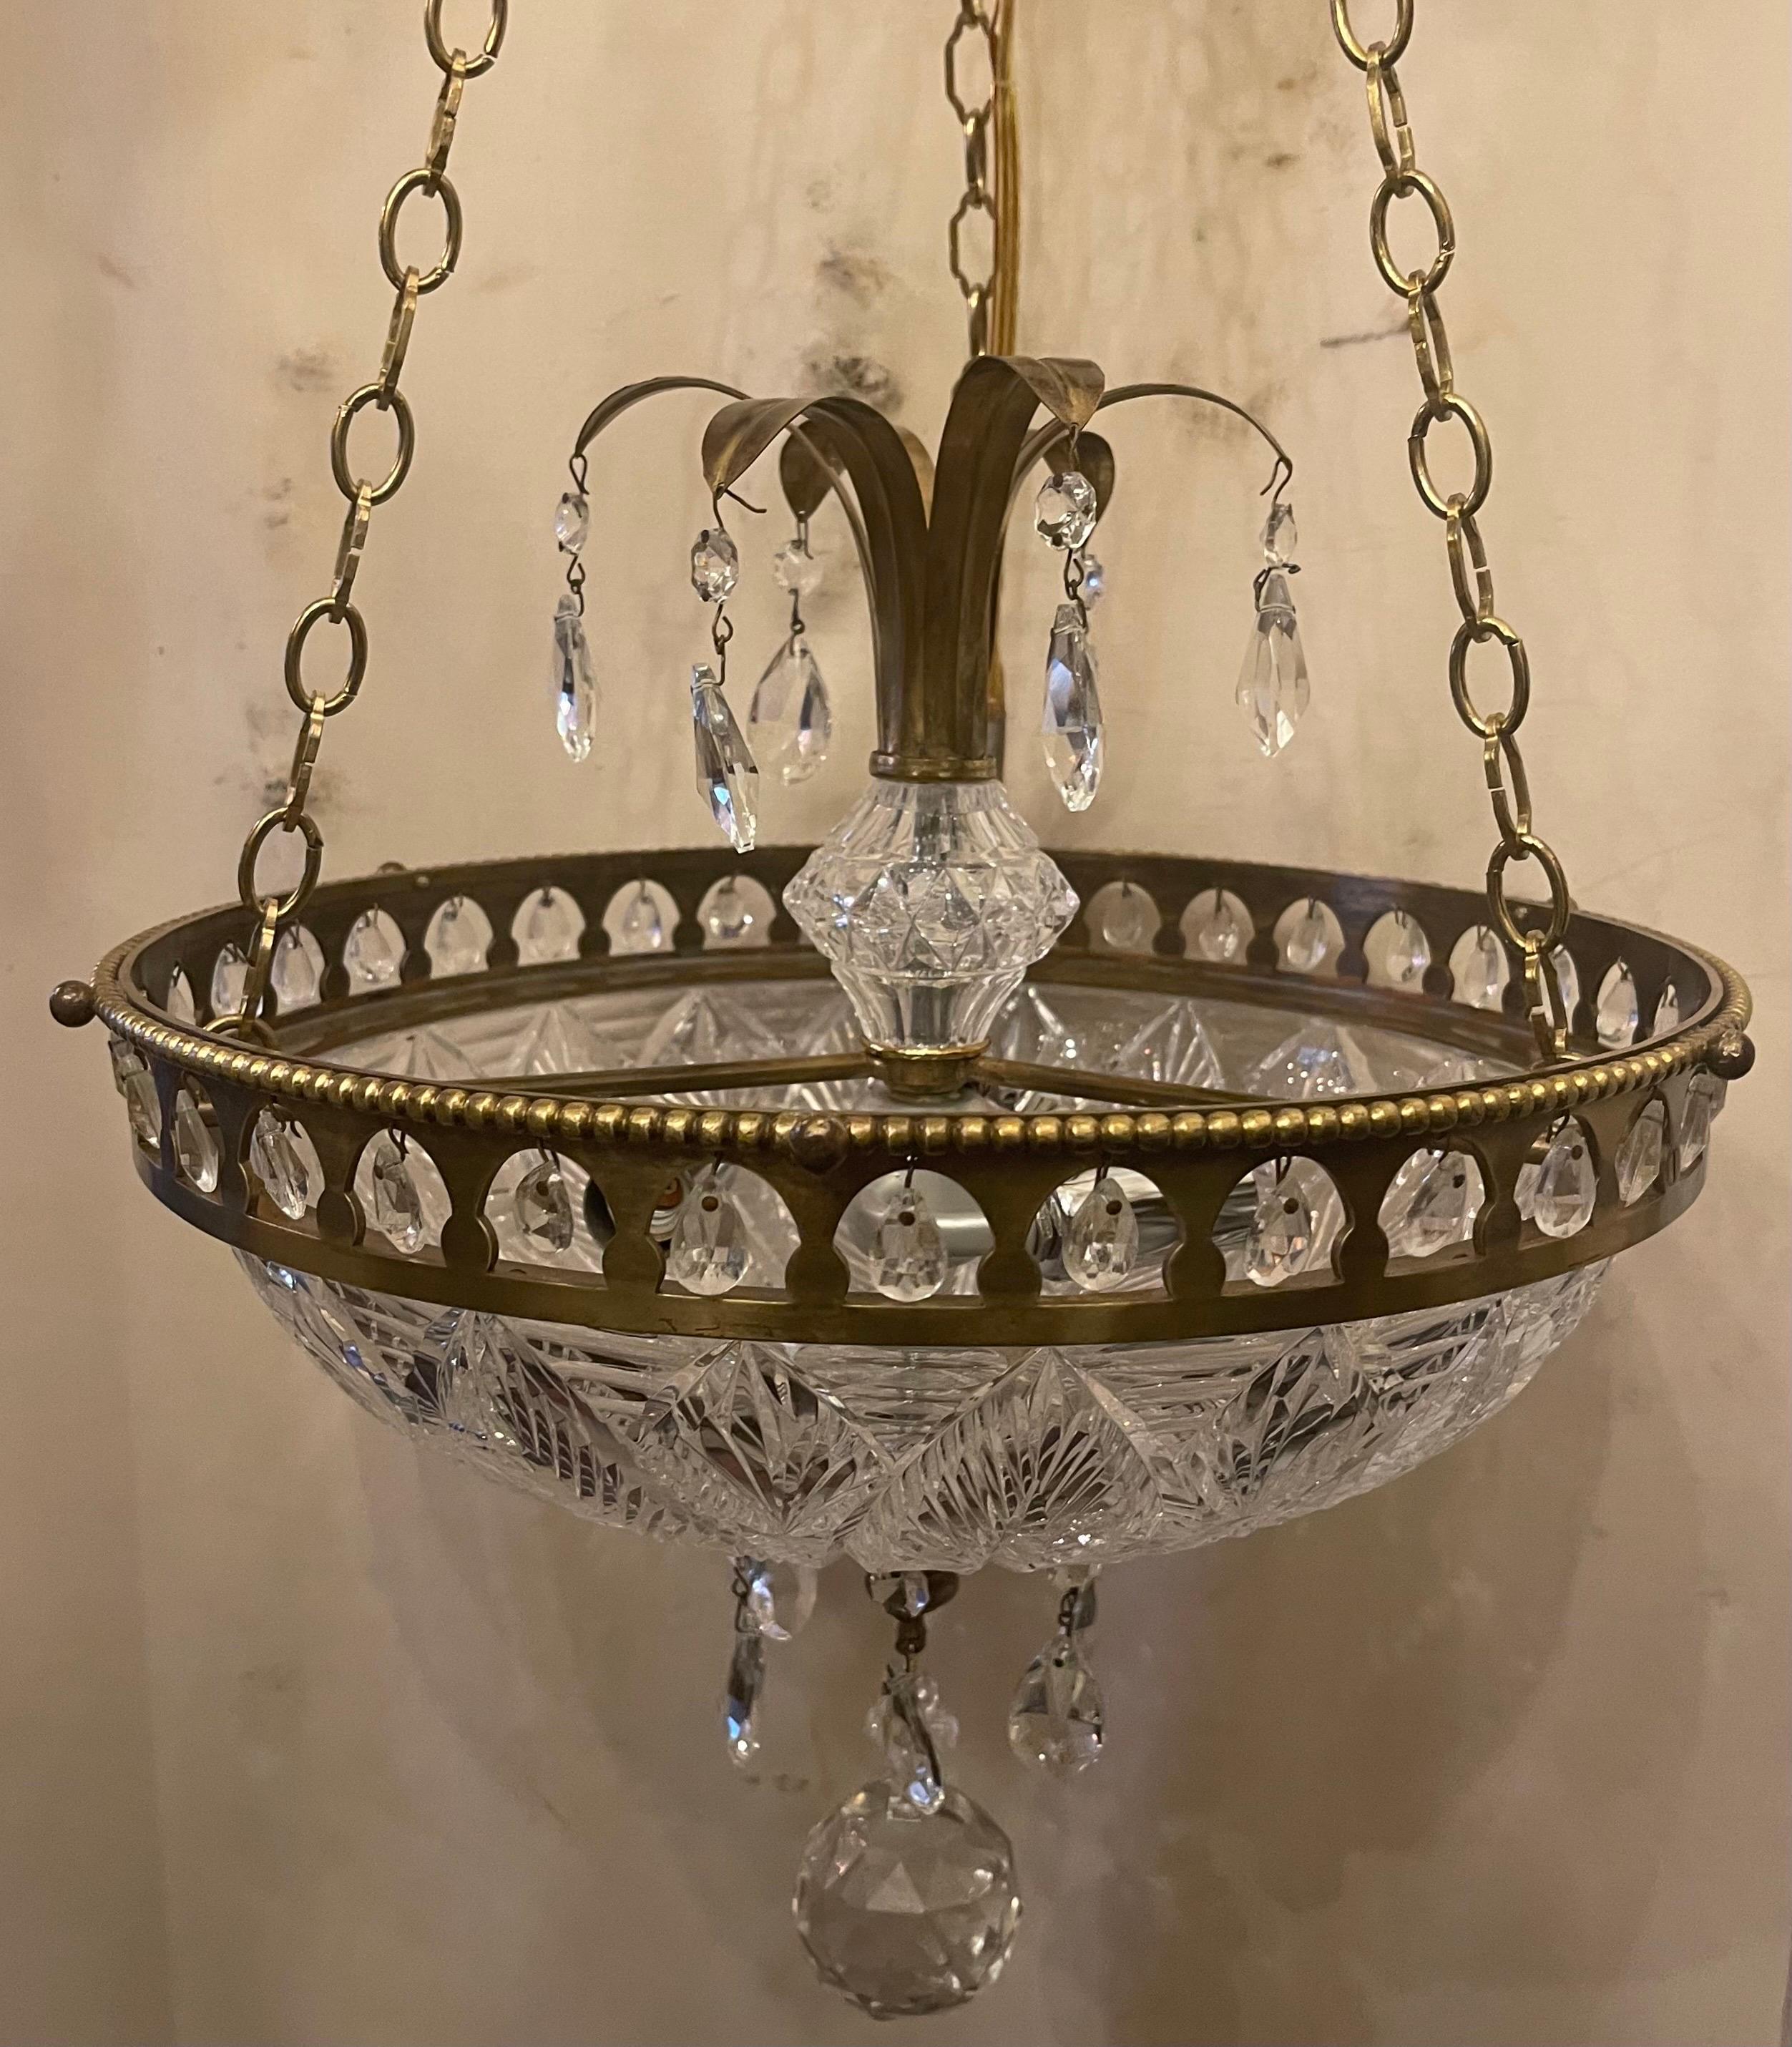 Gilt Wonderful Neoclassical Etched Cut-Crystal Bowl Bronze Chandelier Ormolu Fixture For Sale